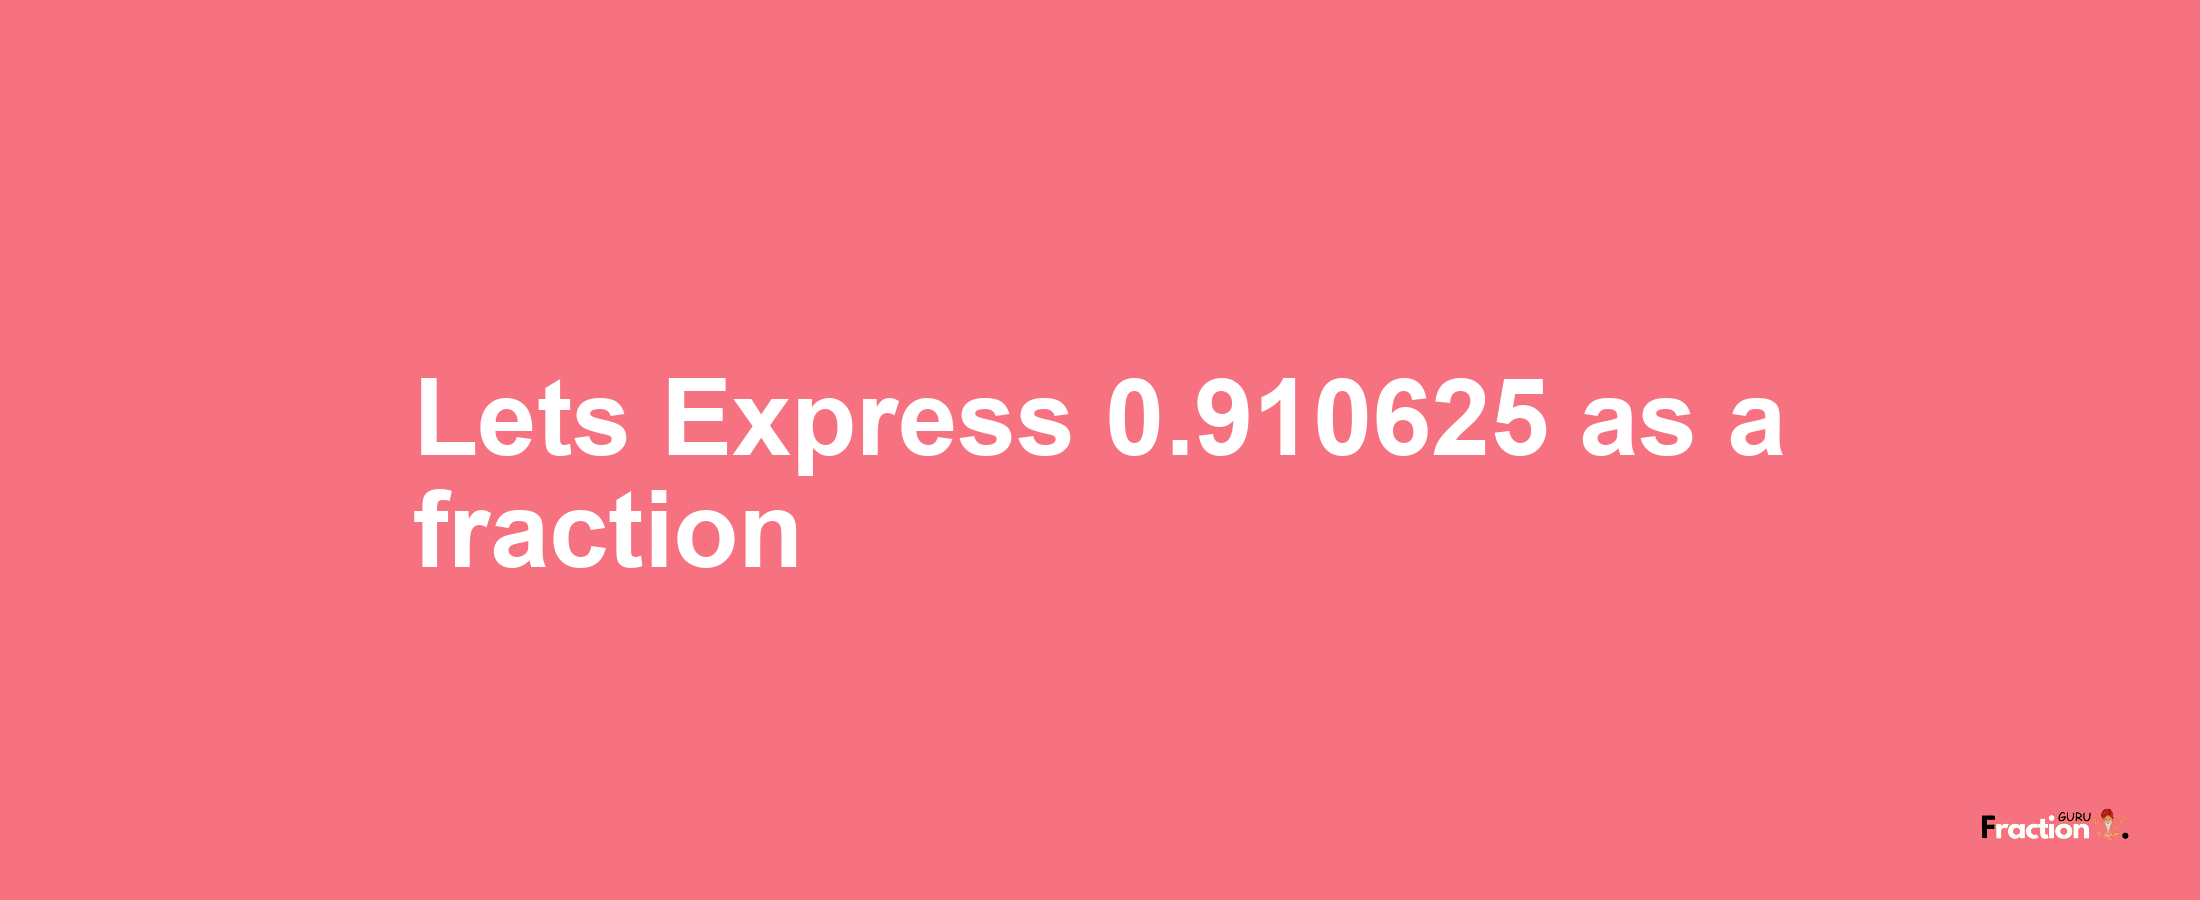 Lets Express 0.910625 as afraction